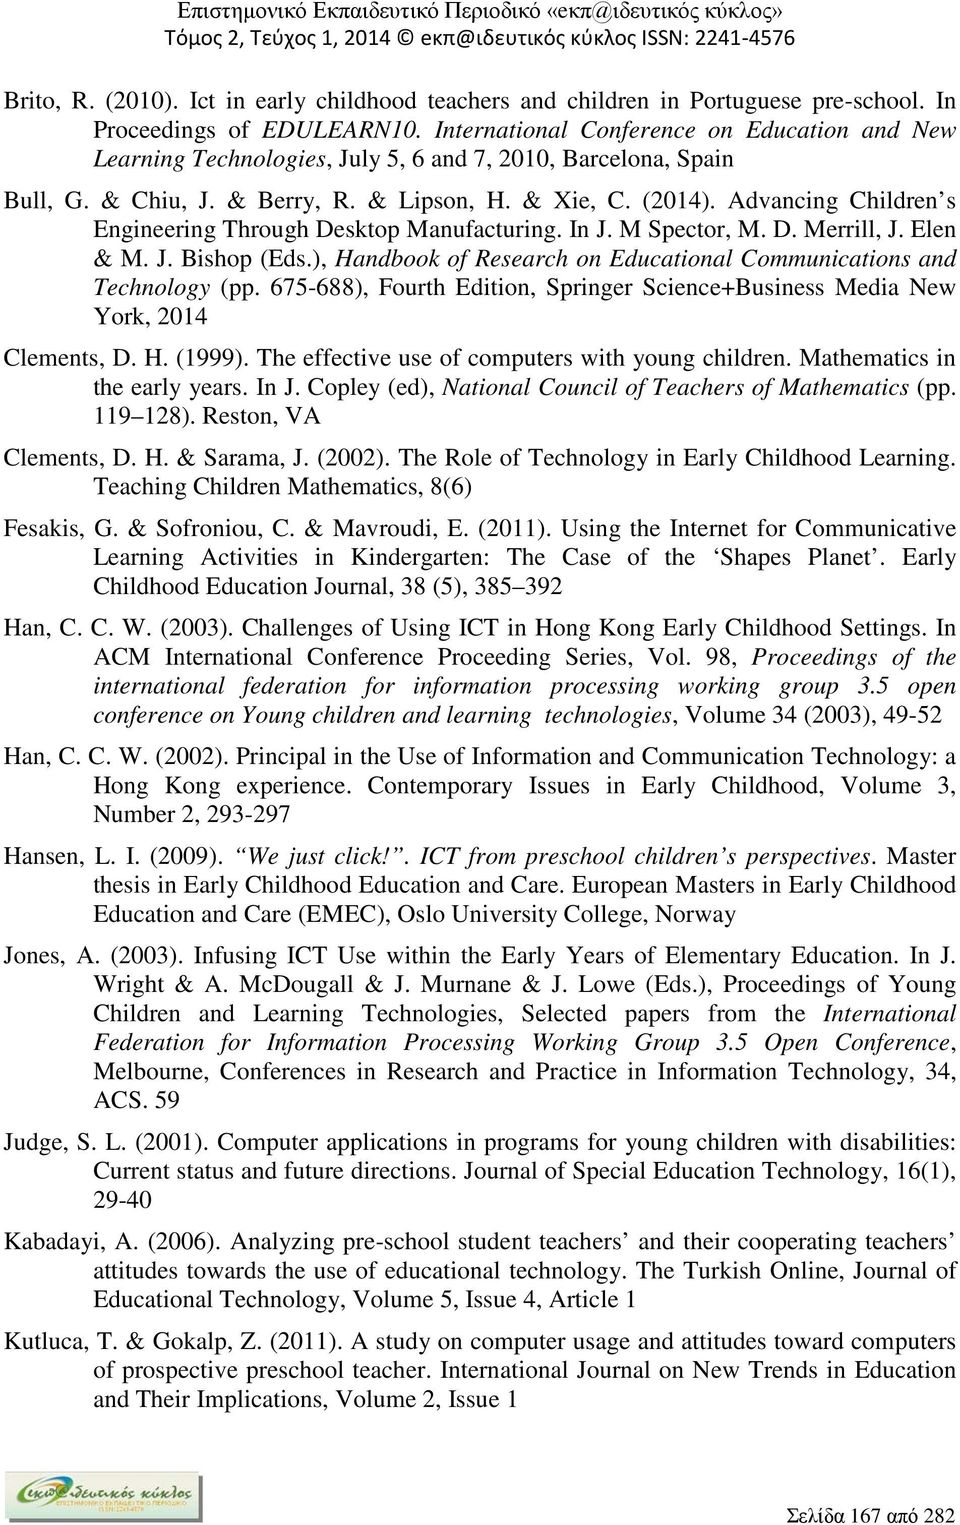 Advancing Children s Engineering Through Desktop Manufacturing. In J. M Spector, M. D. Merrill, J. Elen & M. J. Bishop (Eds.), Handbook of Research on Educational Communications and Technology (pp.